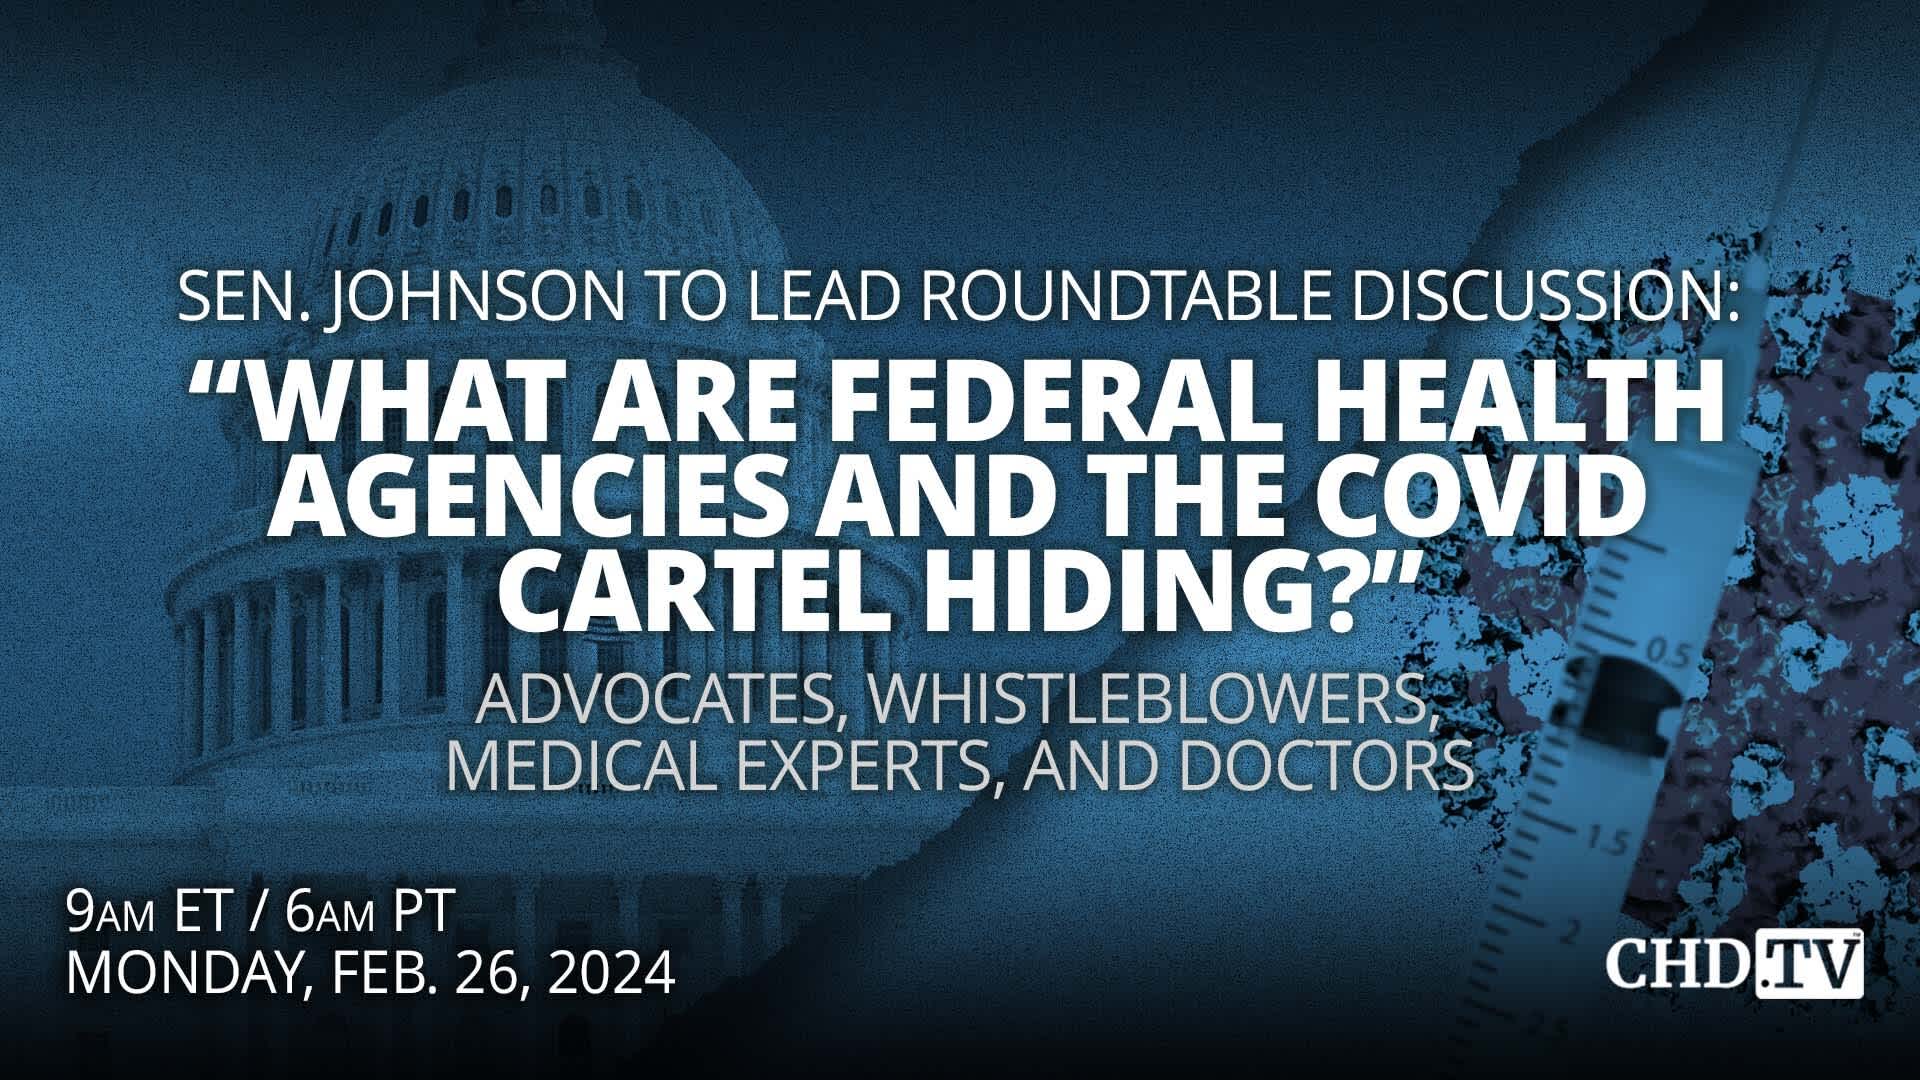 What Are Federal Health Agencies and the COVID Cartel Hiding? | Feb. 26